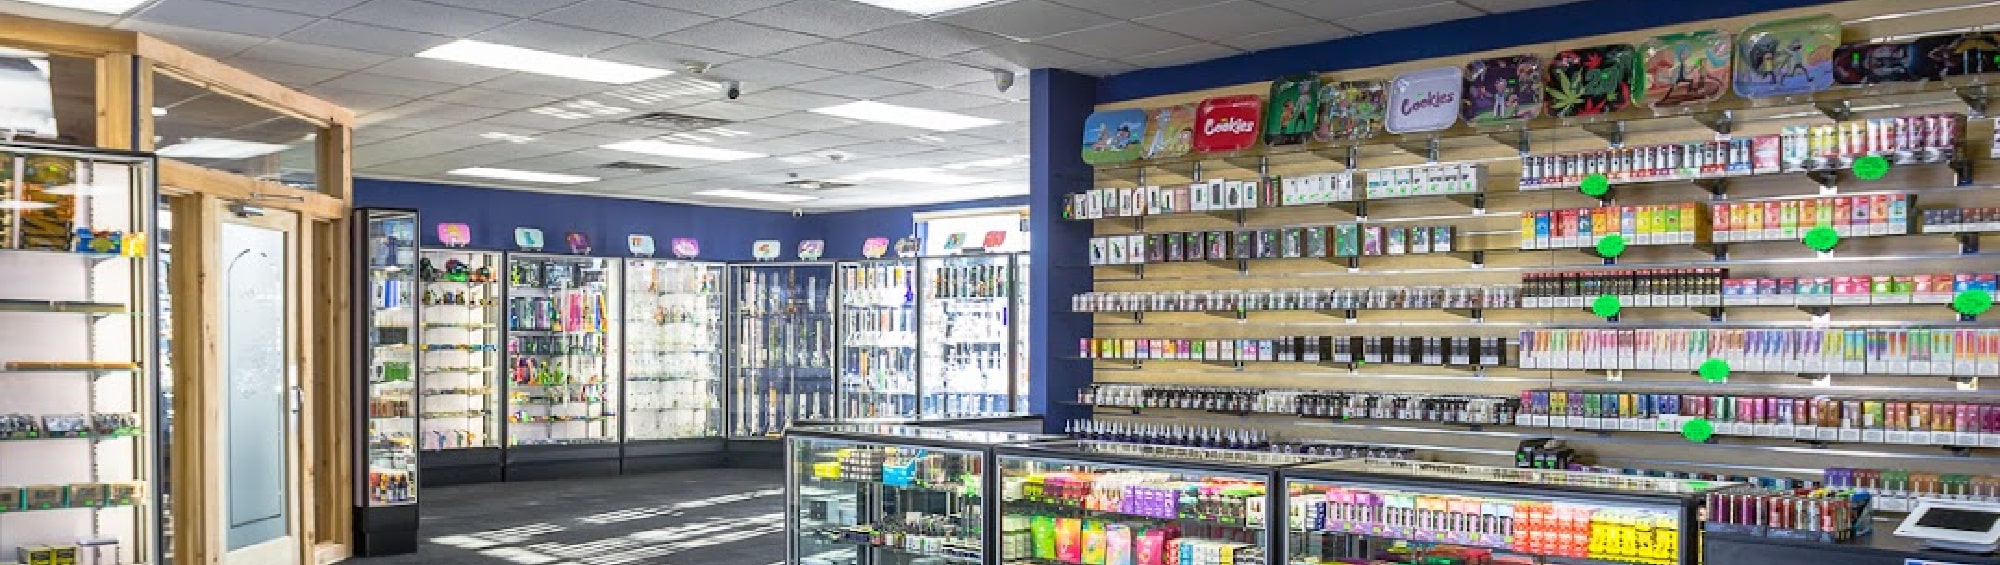 image of high expectations in where you can Buy Kratom in Abilene Texas